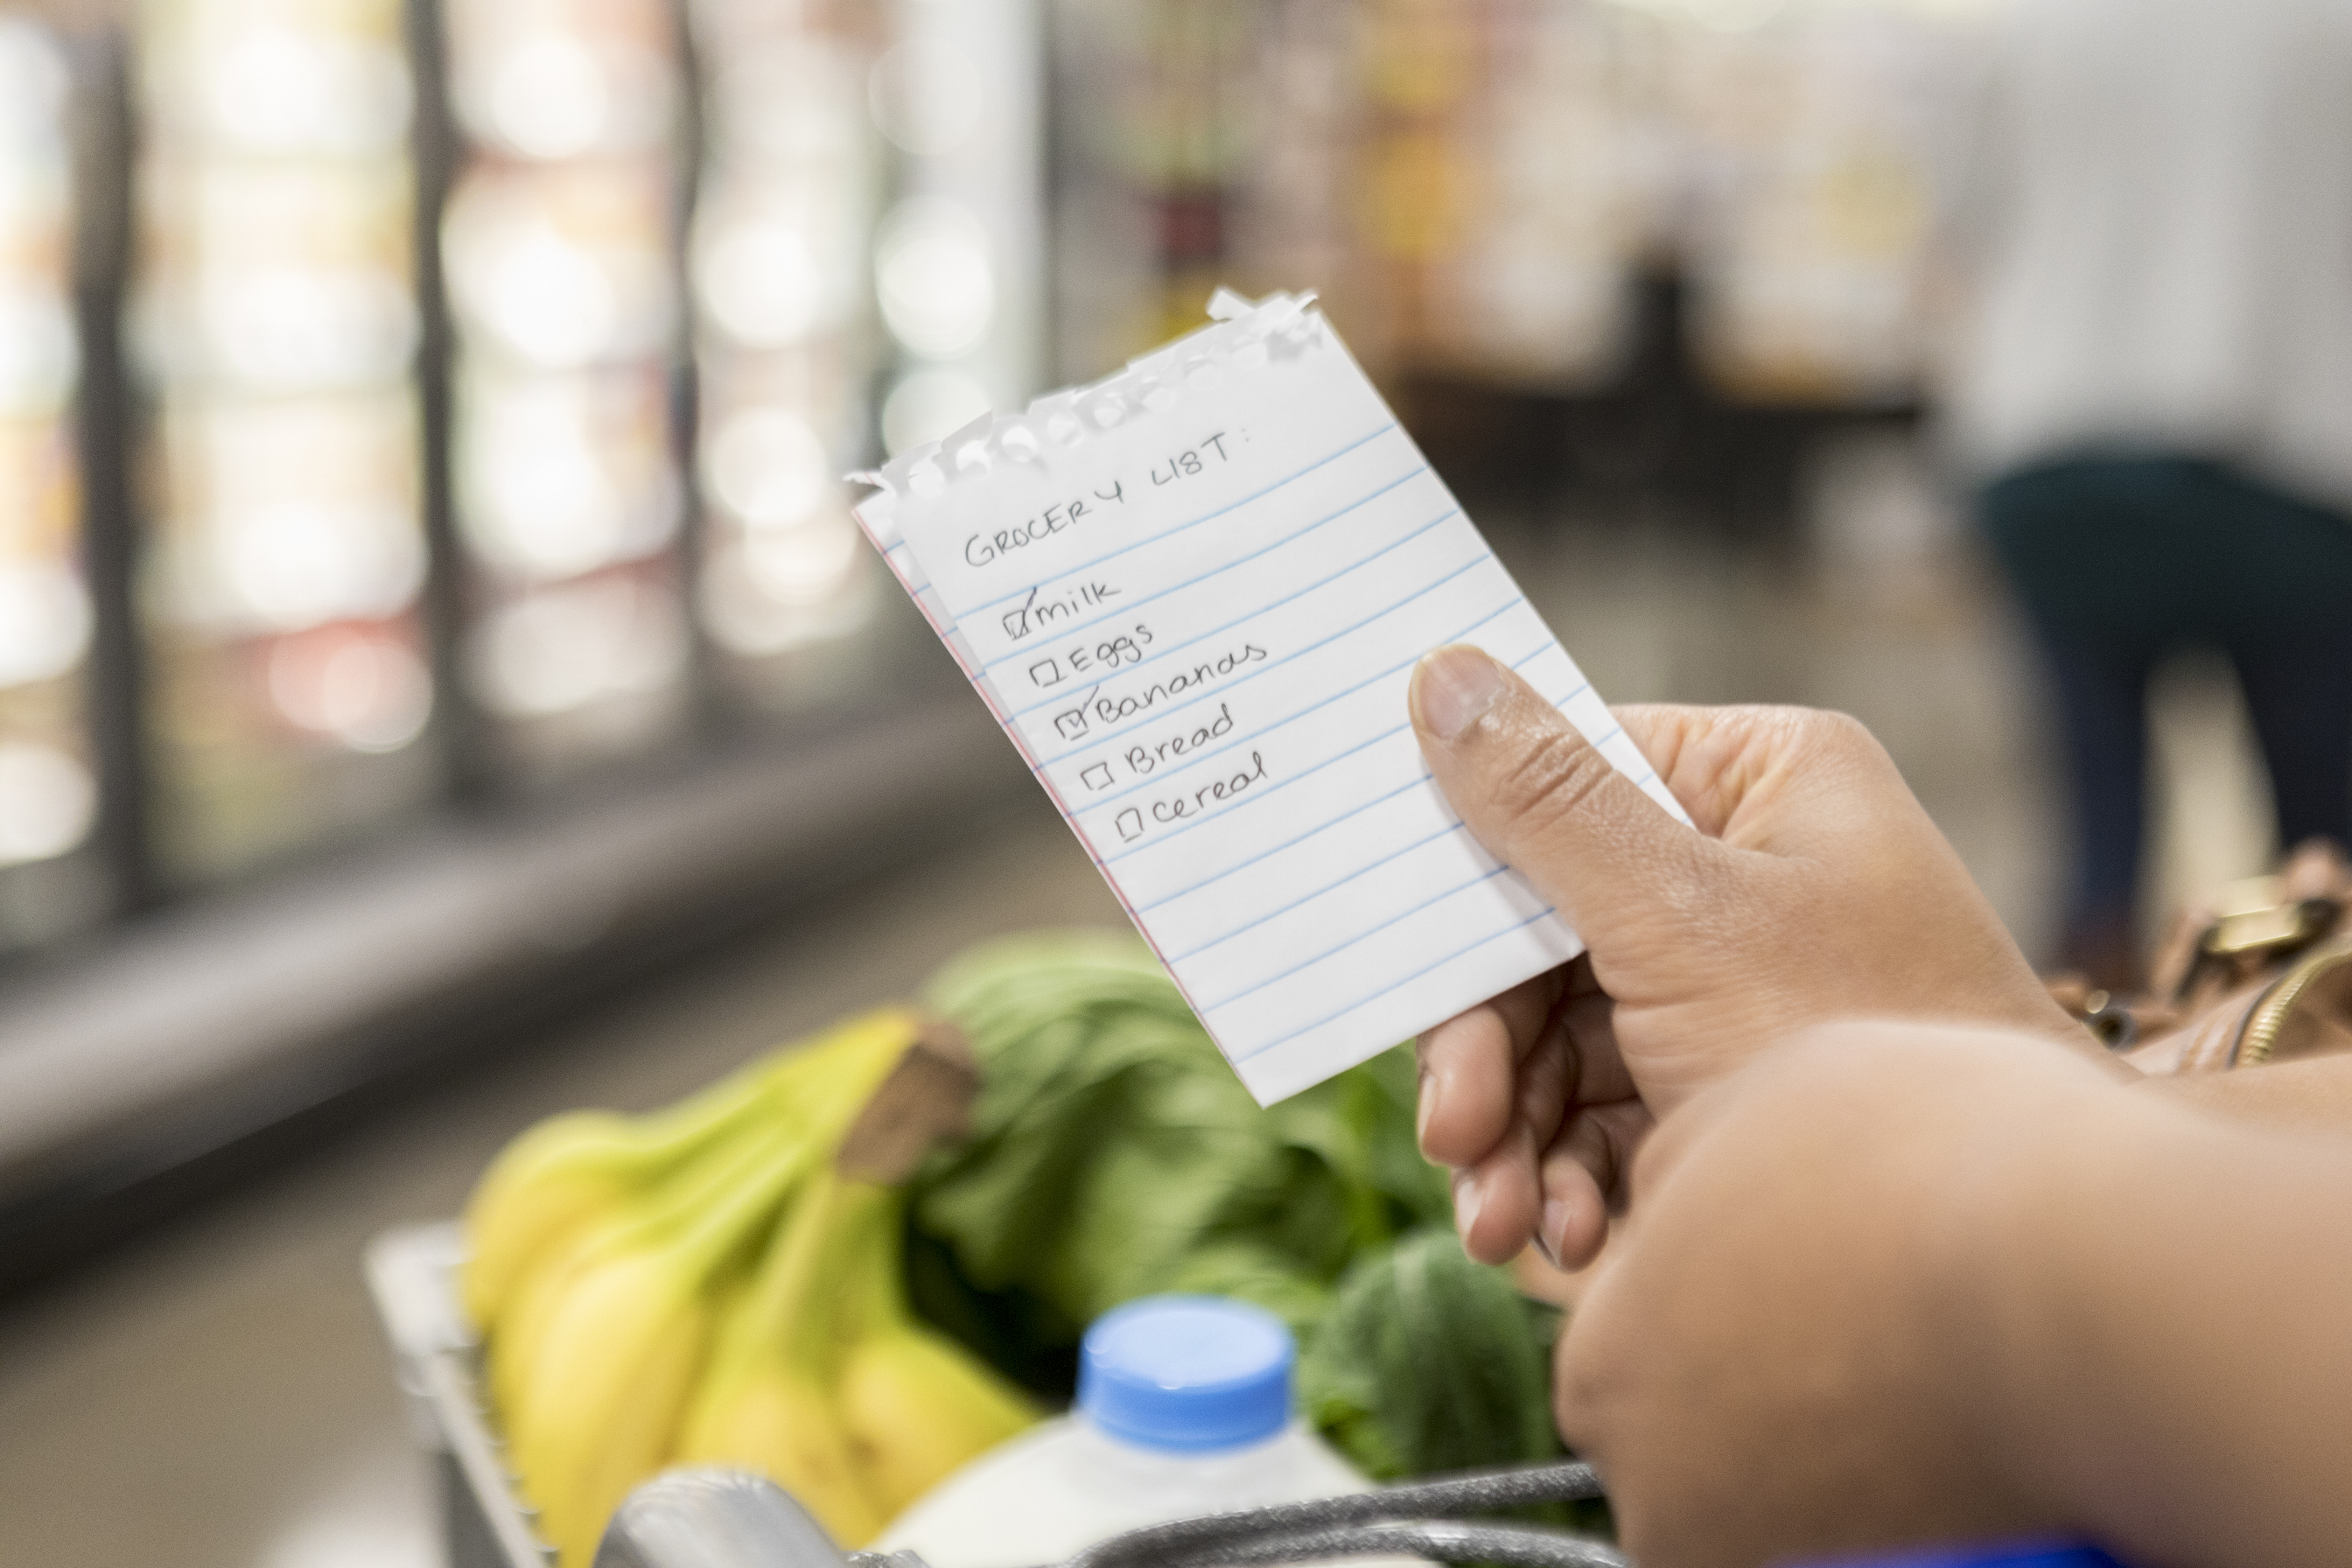 Vicky recommends looking at what you already have in before making a shopping list